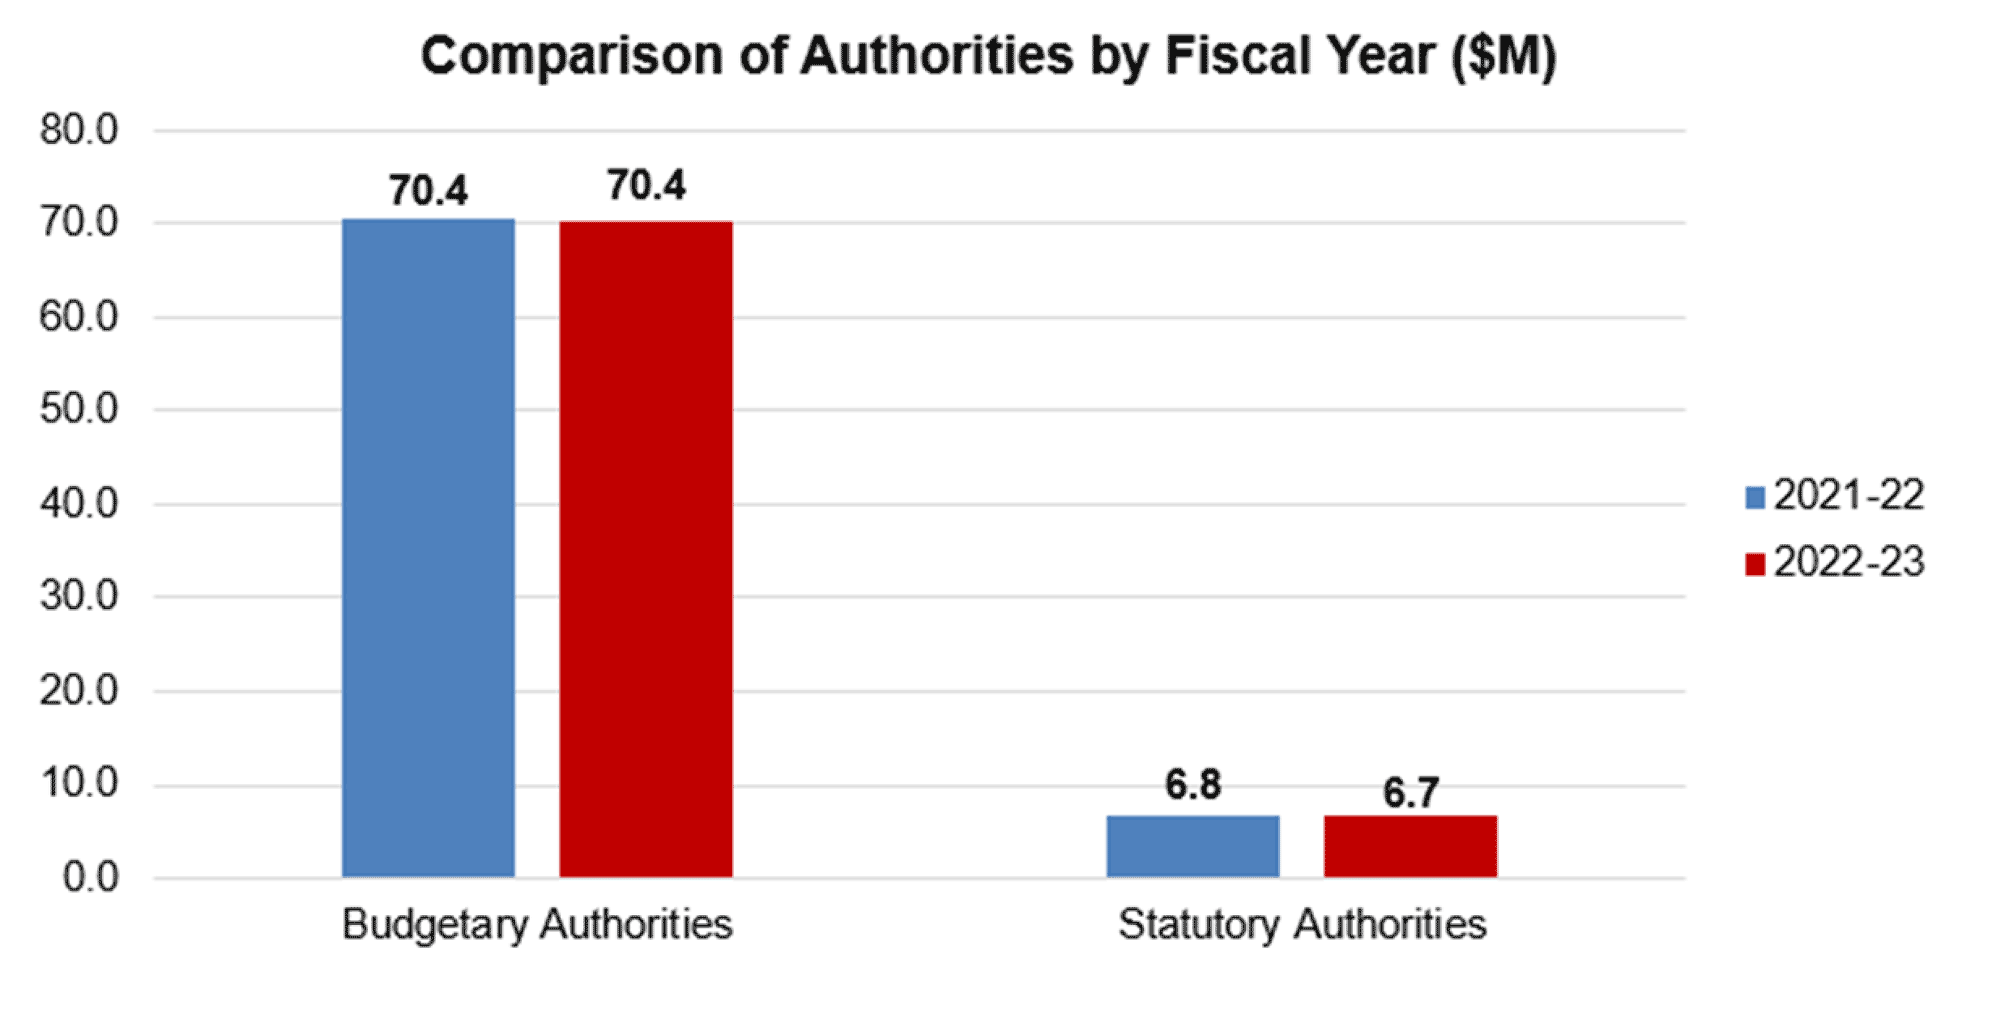 Comparison of Authorities by Fiscal Year ($M). Budgetary Authorities 77.2 in 2020-21, 68.3 in 2022-23. Statutory Authorities 6.8 in 2021-22 and 6.7 in 2022-23.